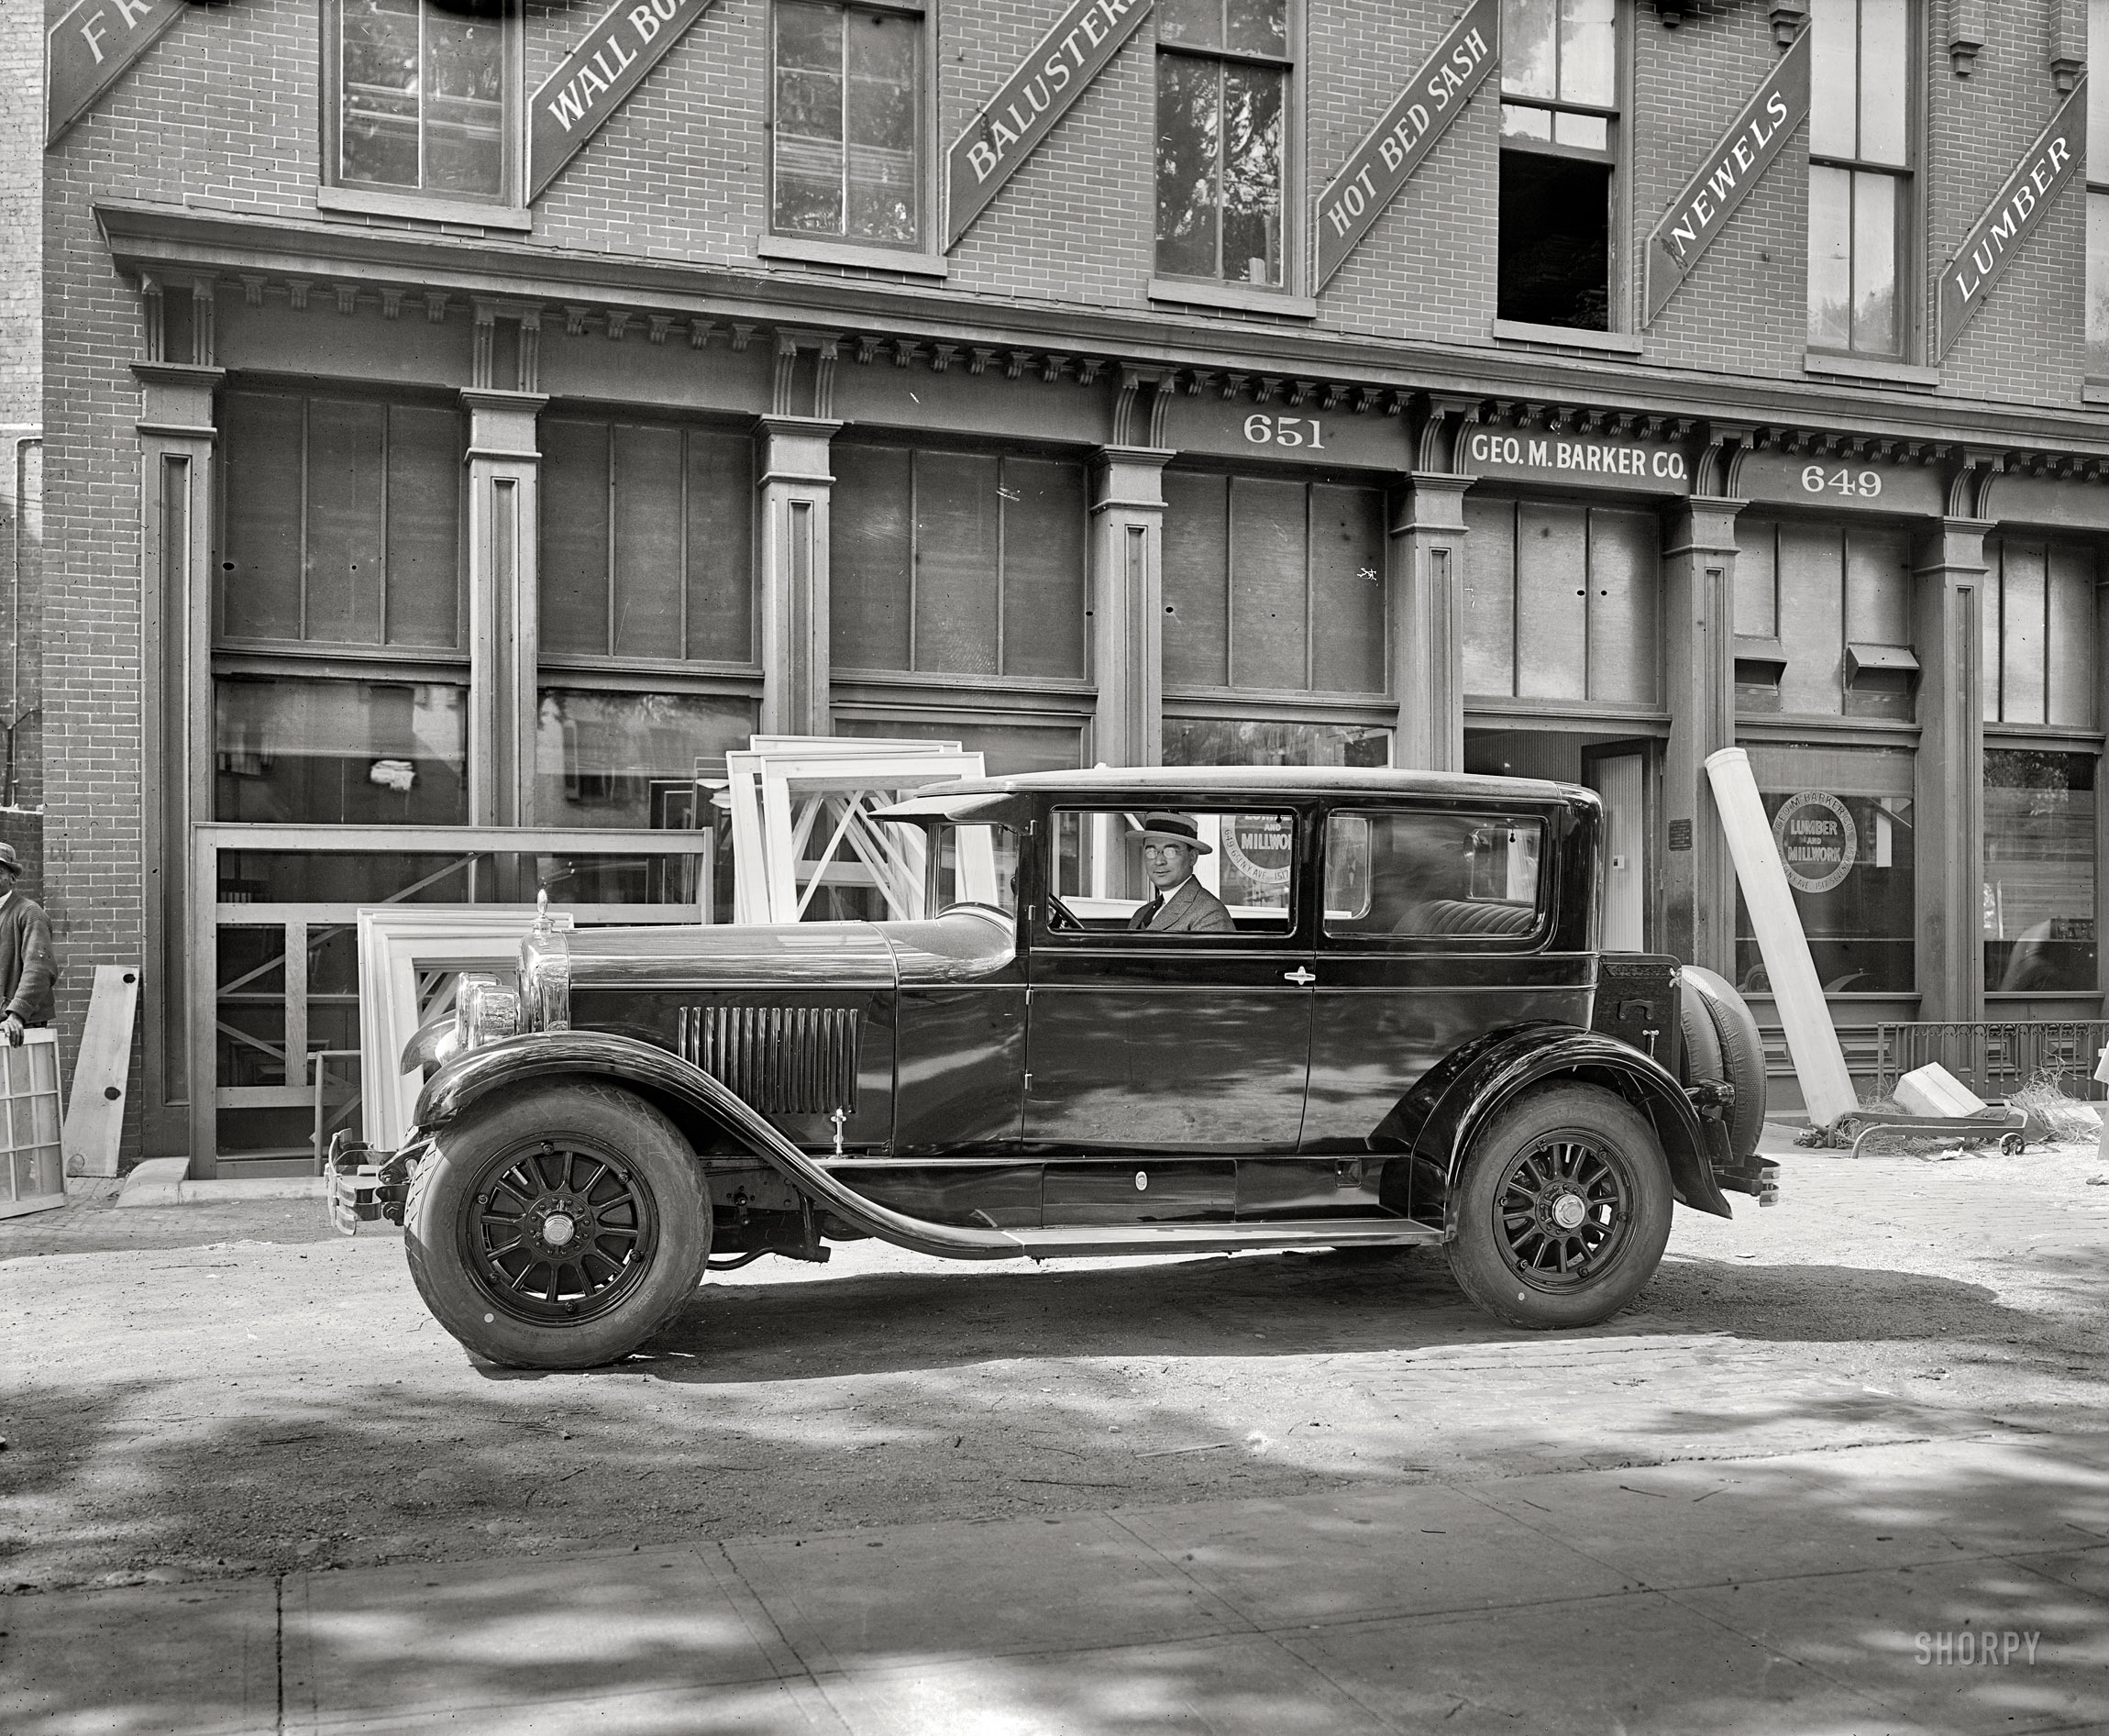 Washington, D.C., circa 1926. "Washington Cadillac Co." A glossy new Cadillac in front of Barker Lumber, your headquarters for newels, balusters and "hot bed sash." National Photo Company Collection glass negative. View full size.